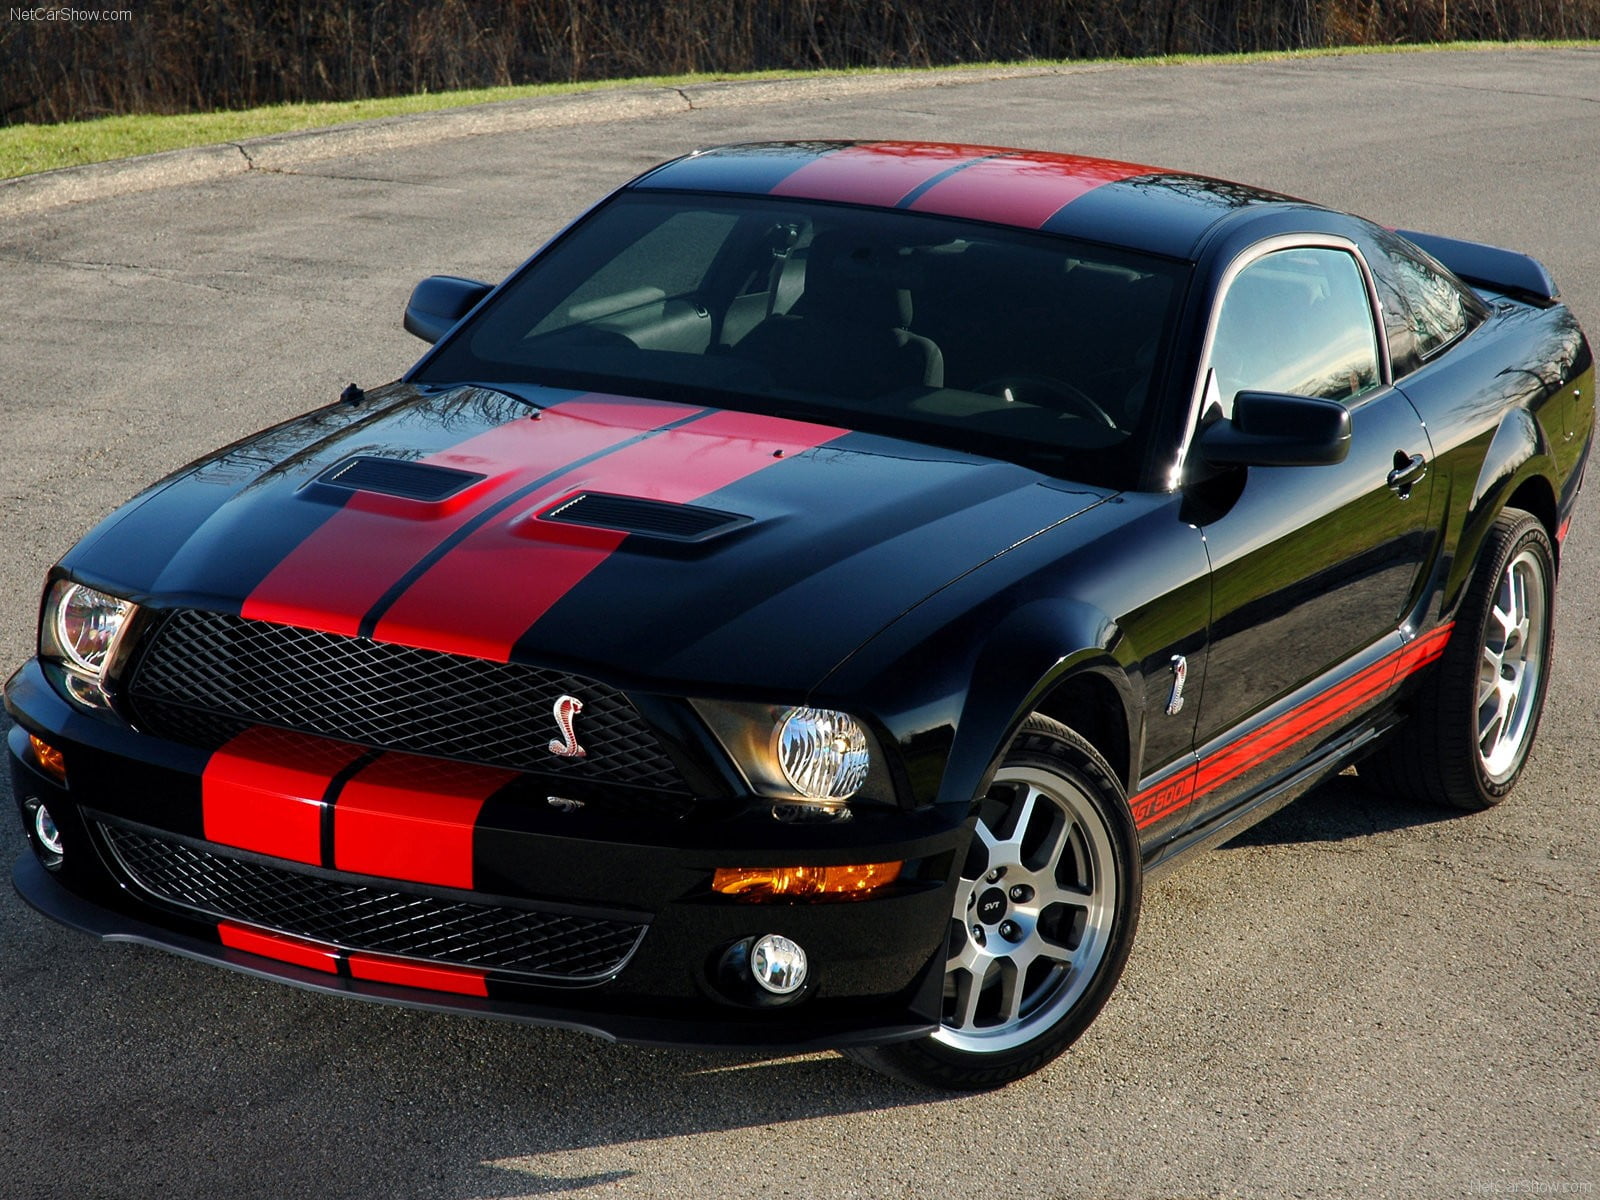 black and red Shelby Cobra coupe, car, Ford, Ford Mustang, Shelby